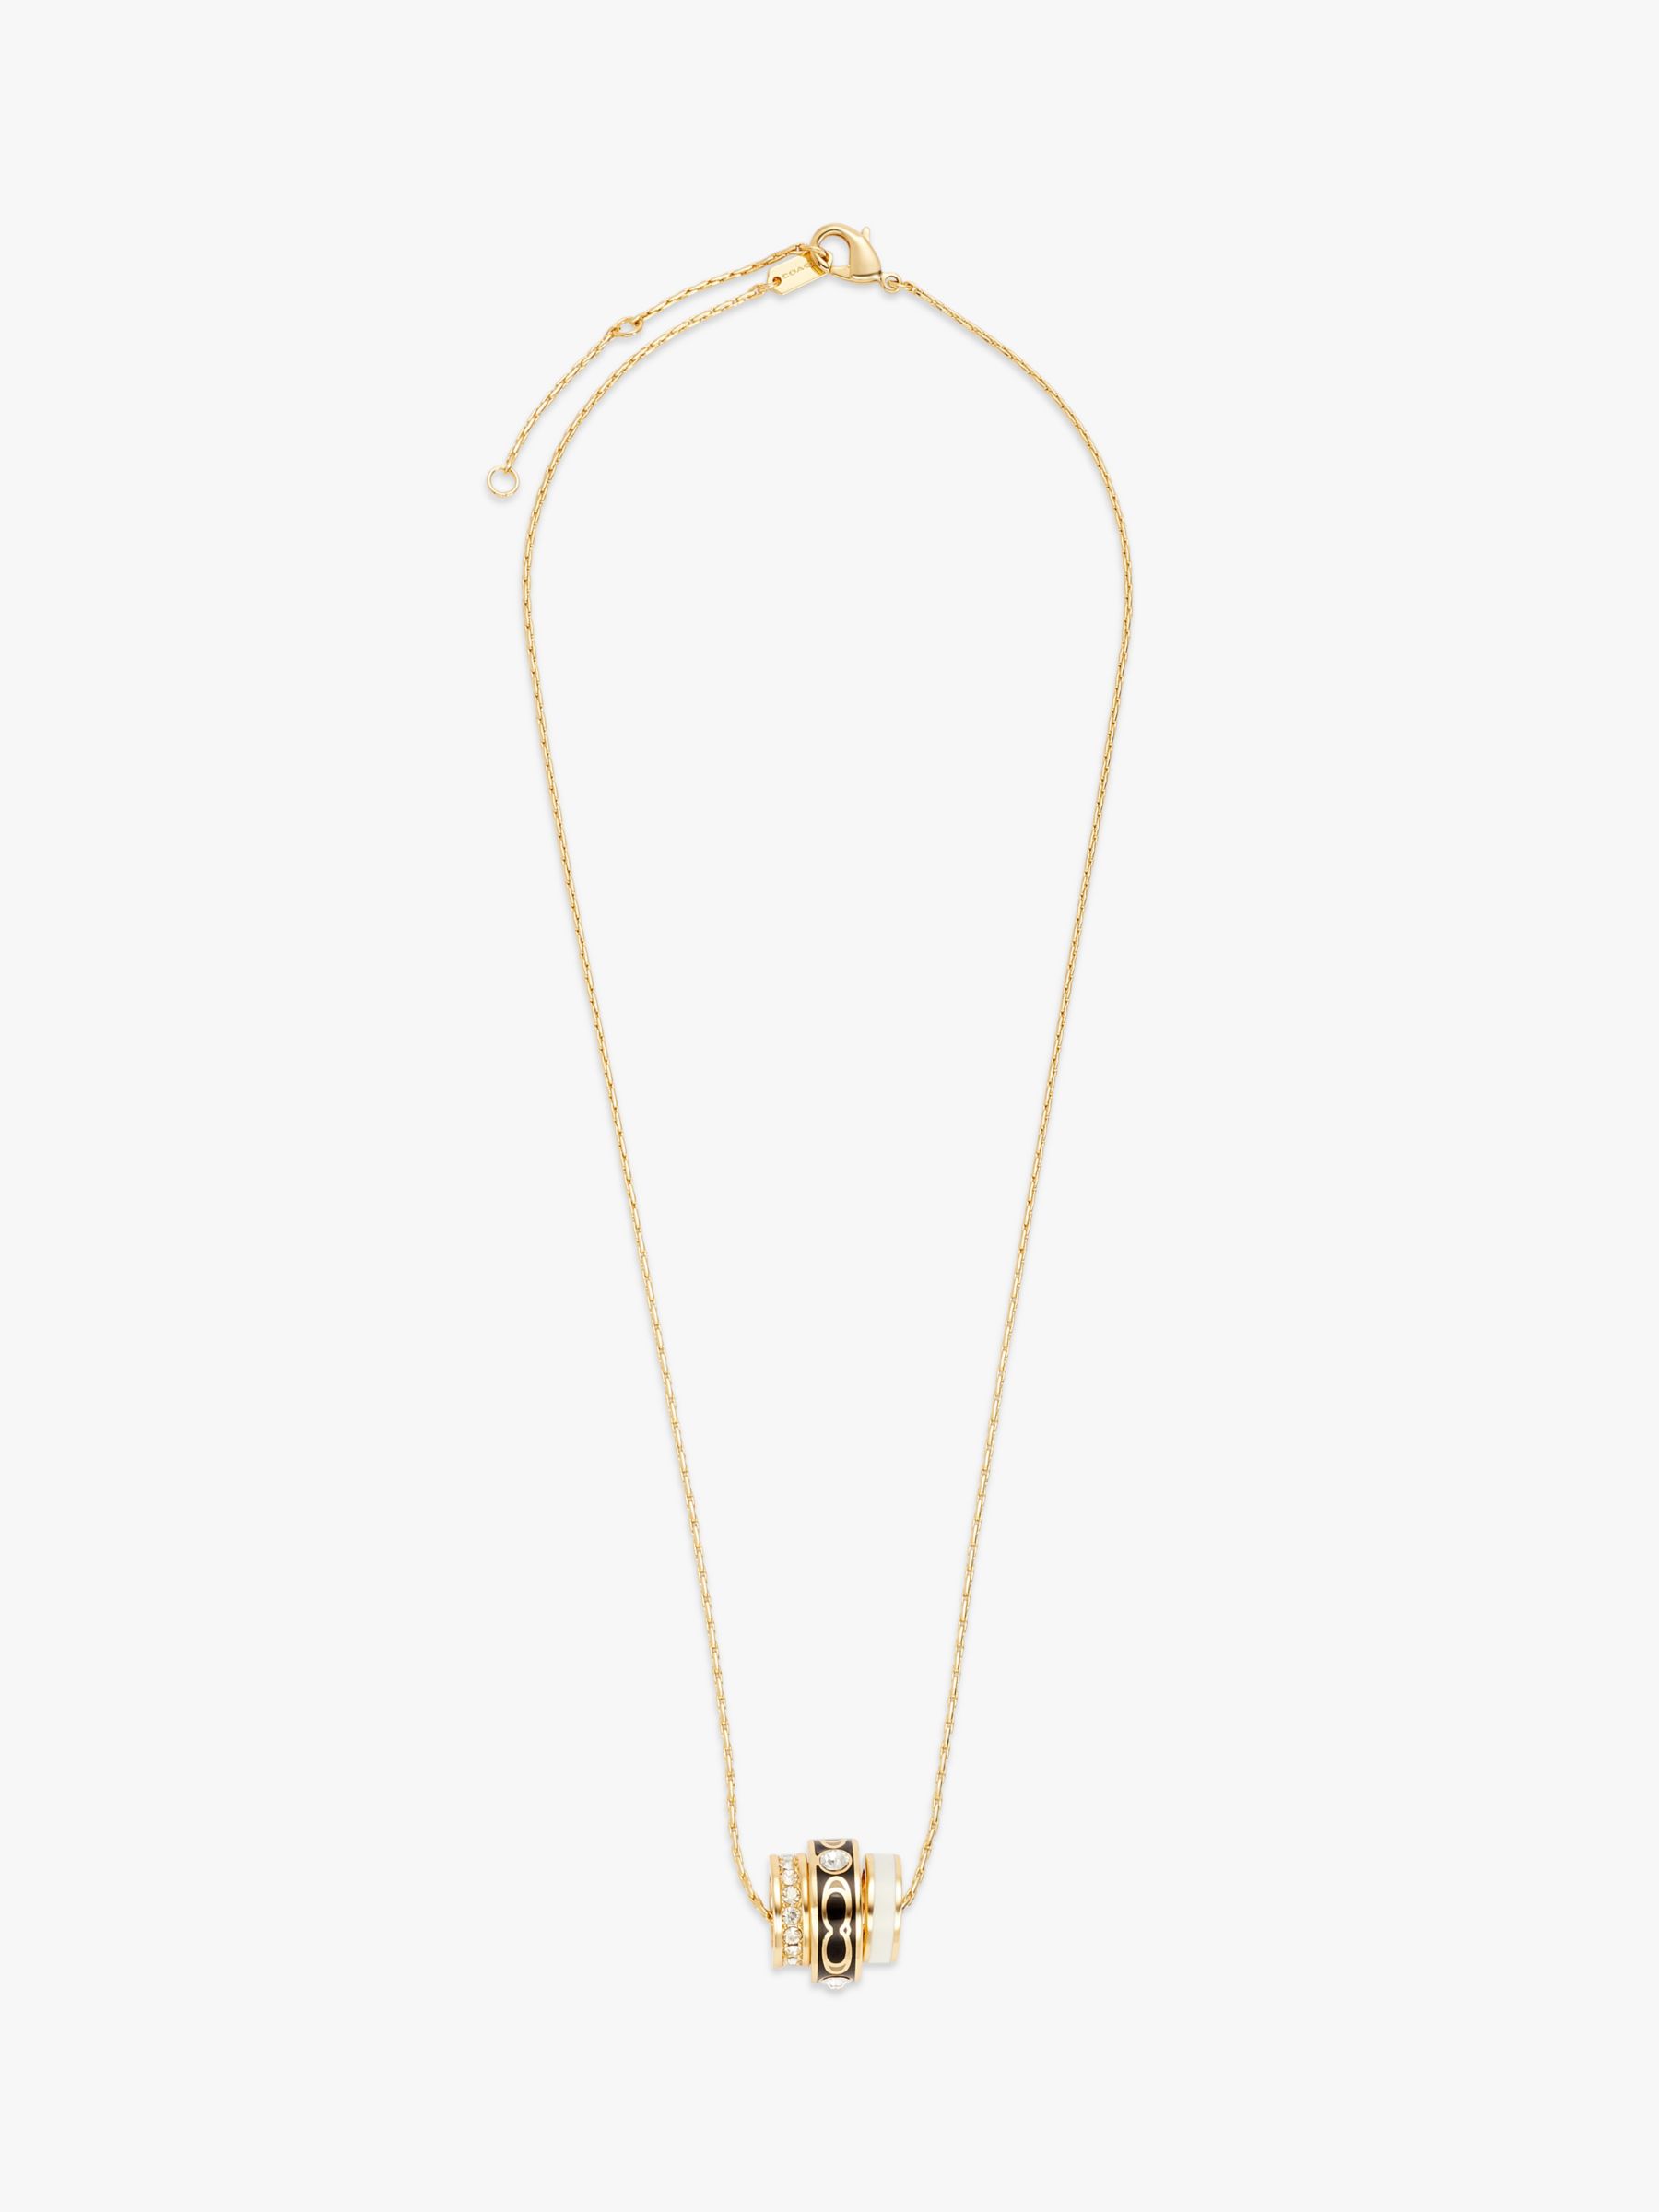 Coach Enamel and Crystal Three Ring Pendant Necklace, Gold/Multi